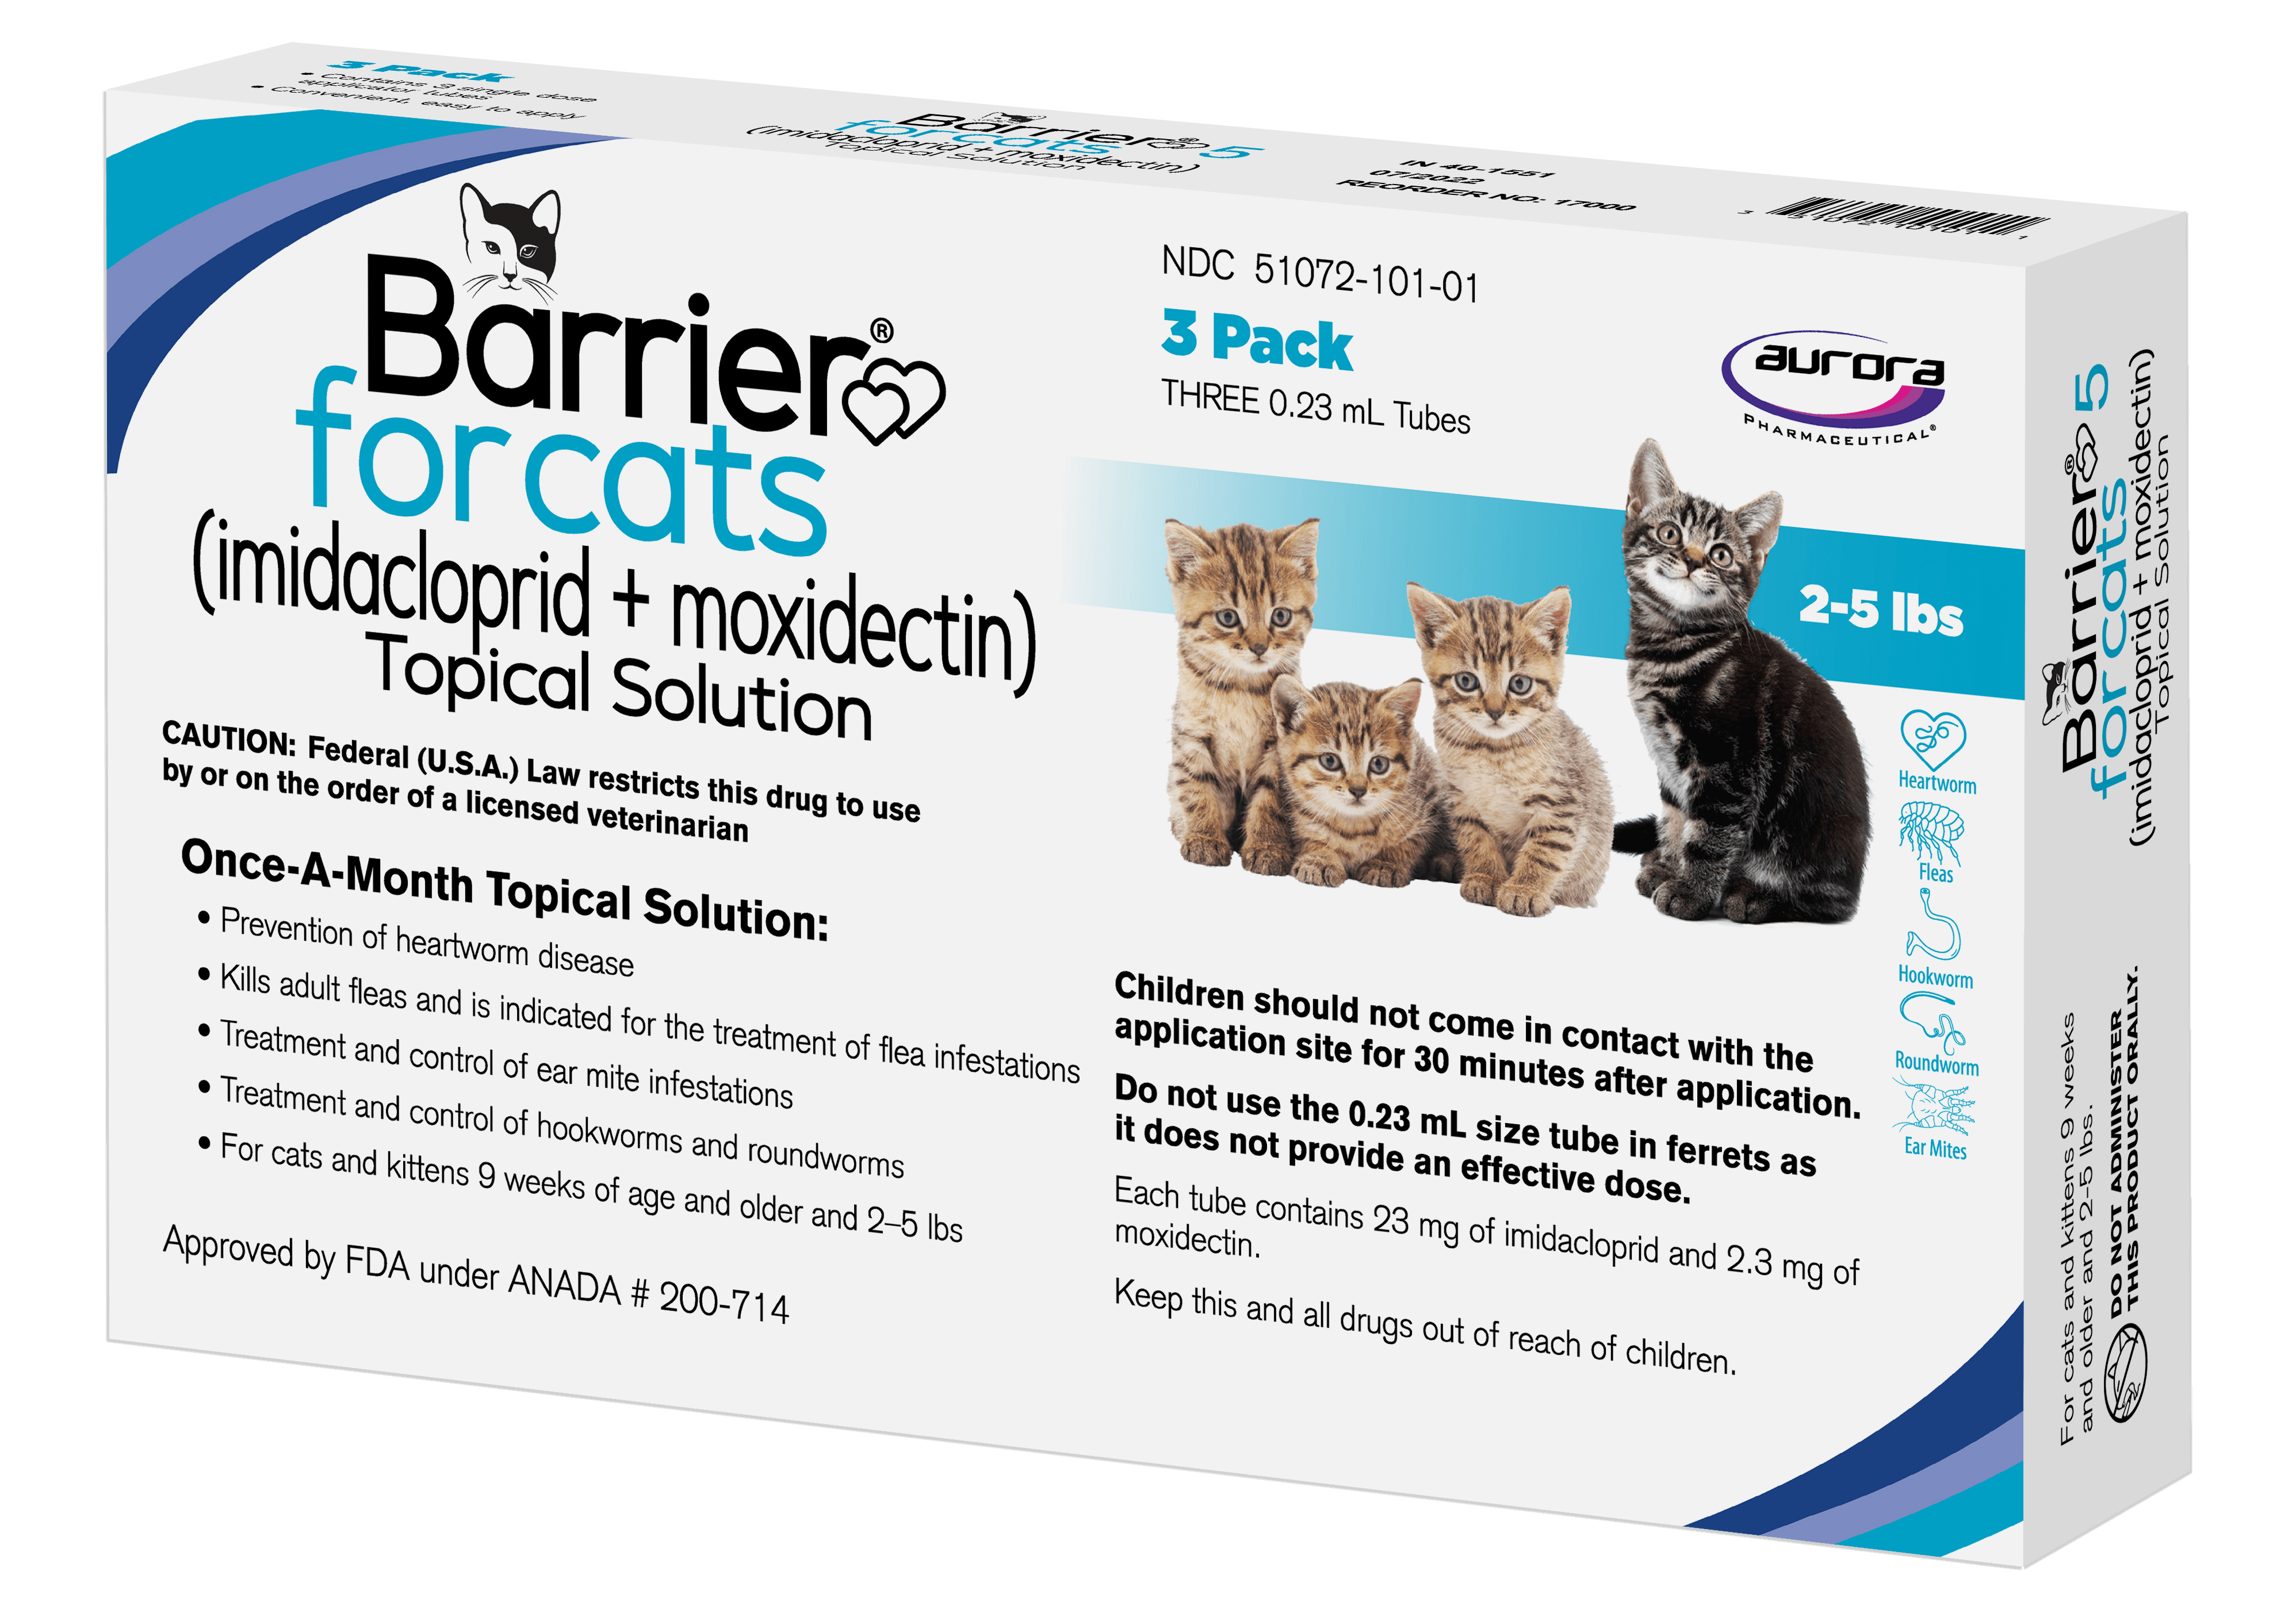 barrier-for-cats-2-5-lbs-png